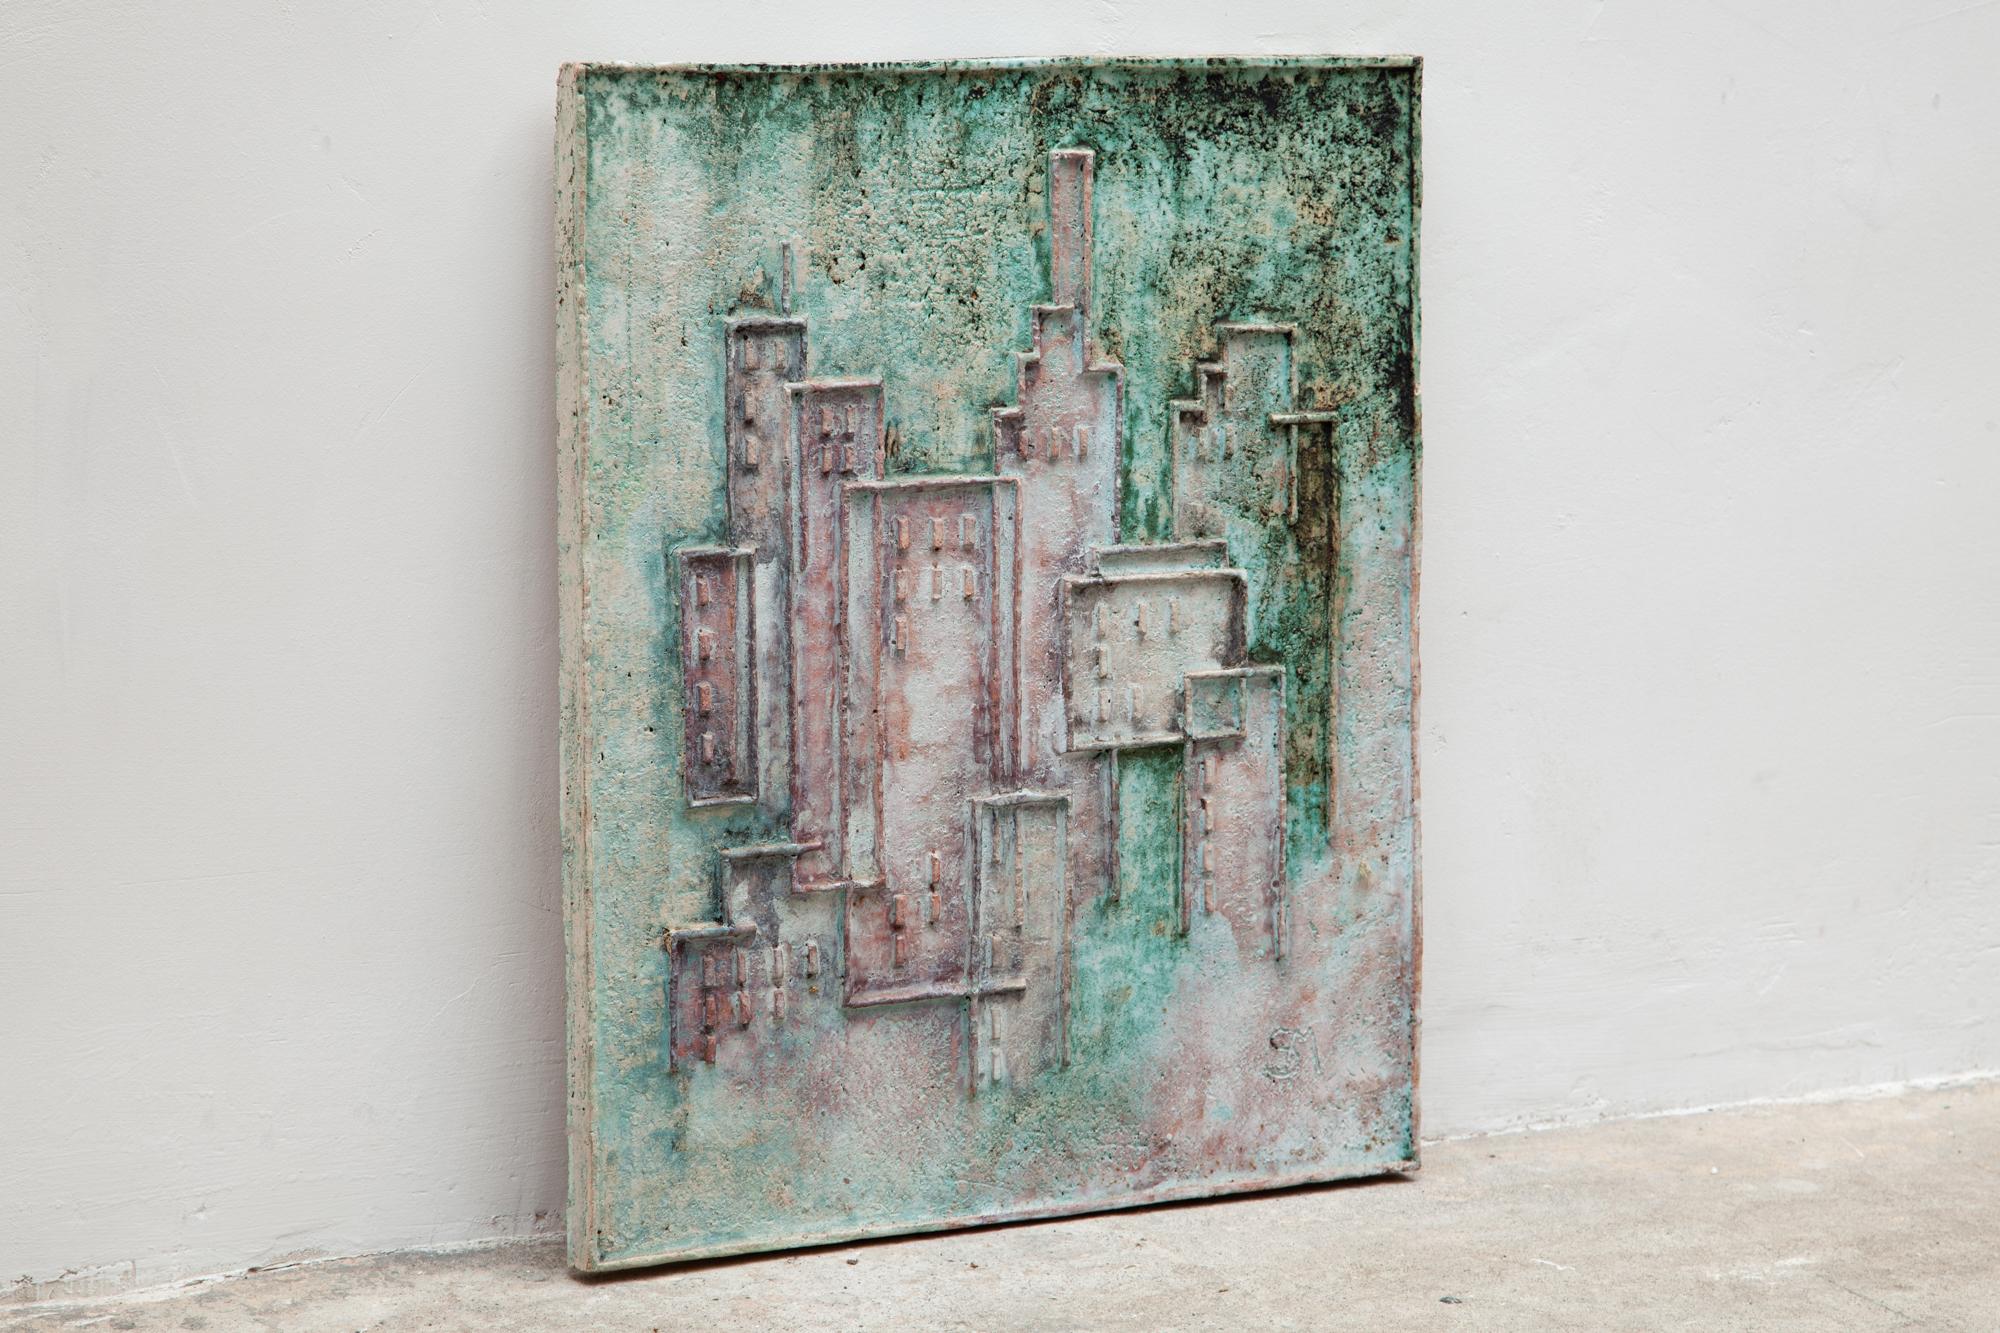 Very nice ceramic relief abstract designed by unknown Belgium artist in the seventies. The abstract sculpture in grey ceramic was glazed in dark grey, green and pink tones. This wall sculpture is in a good condition. Signed SM- unknown artist.